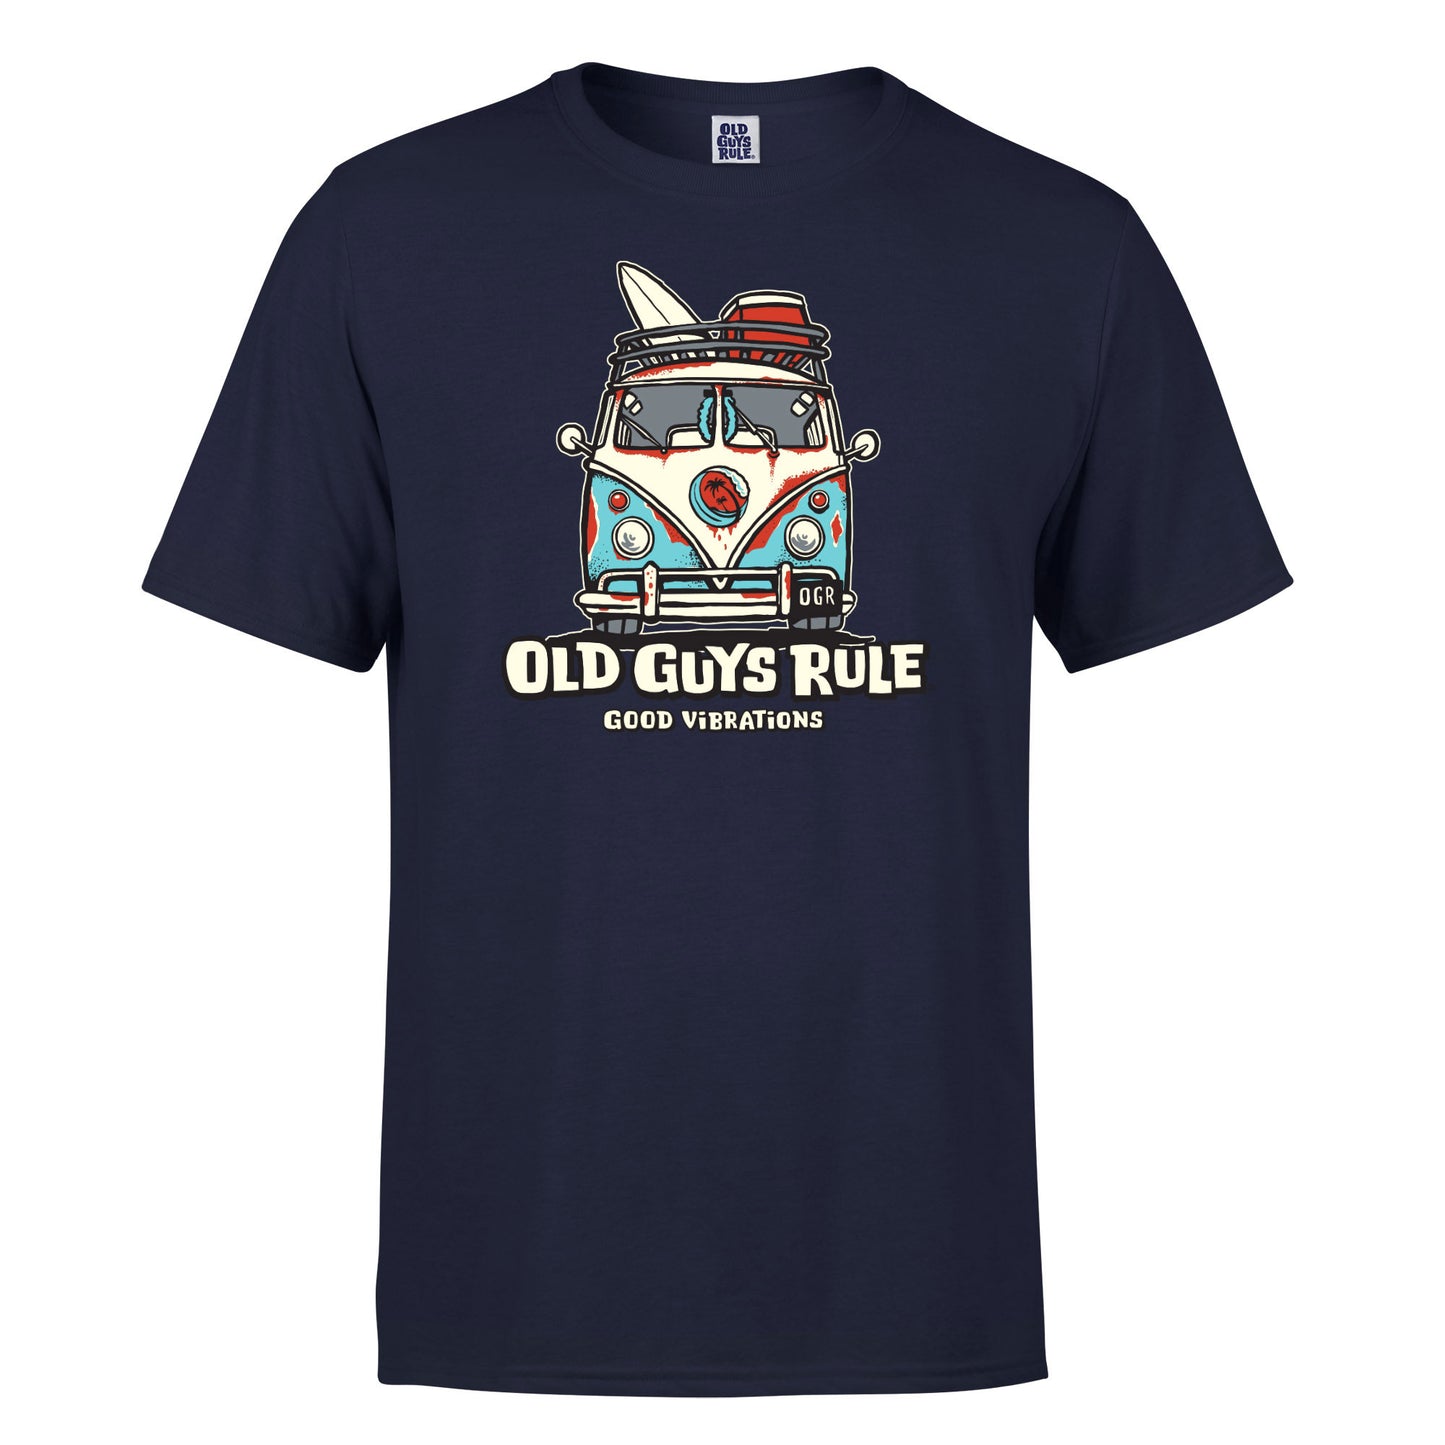 Old Guys Rule T-Shirt - Good Vibrations ||| - Navy